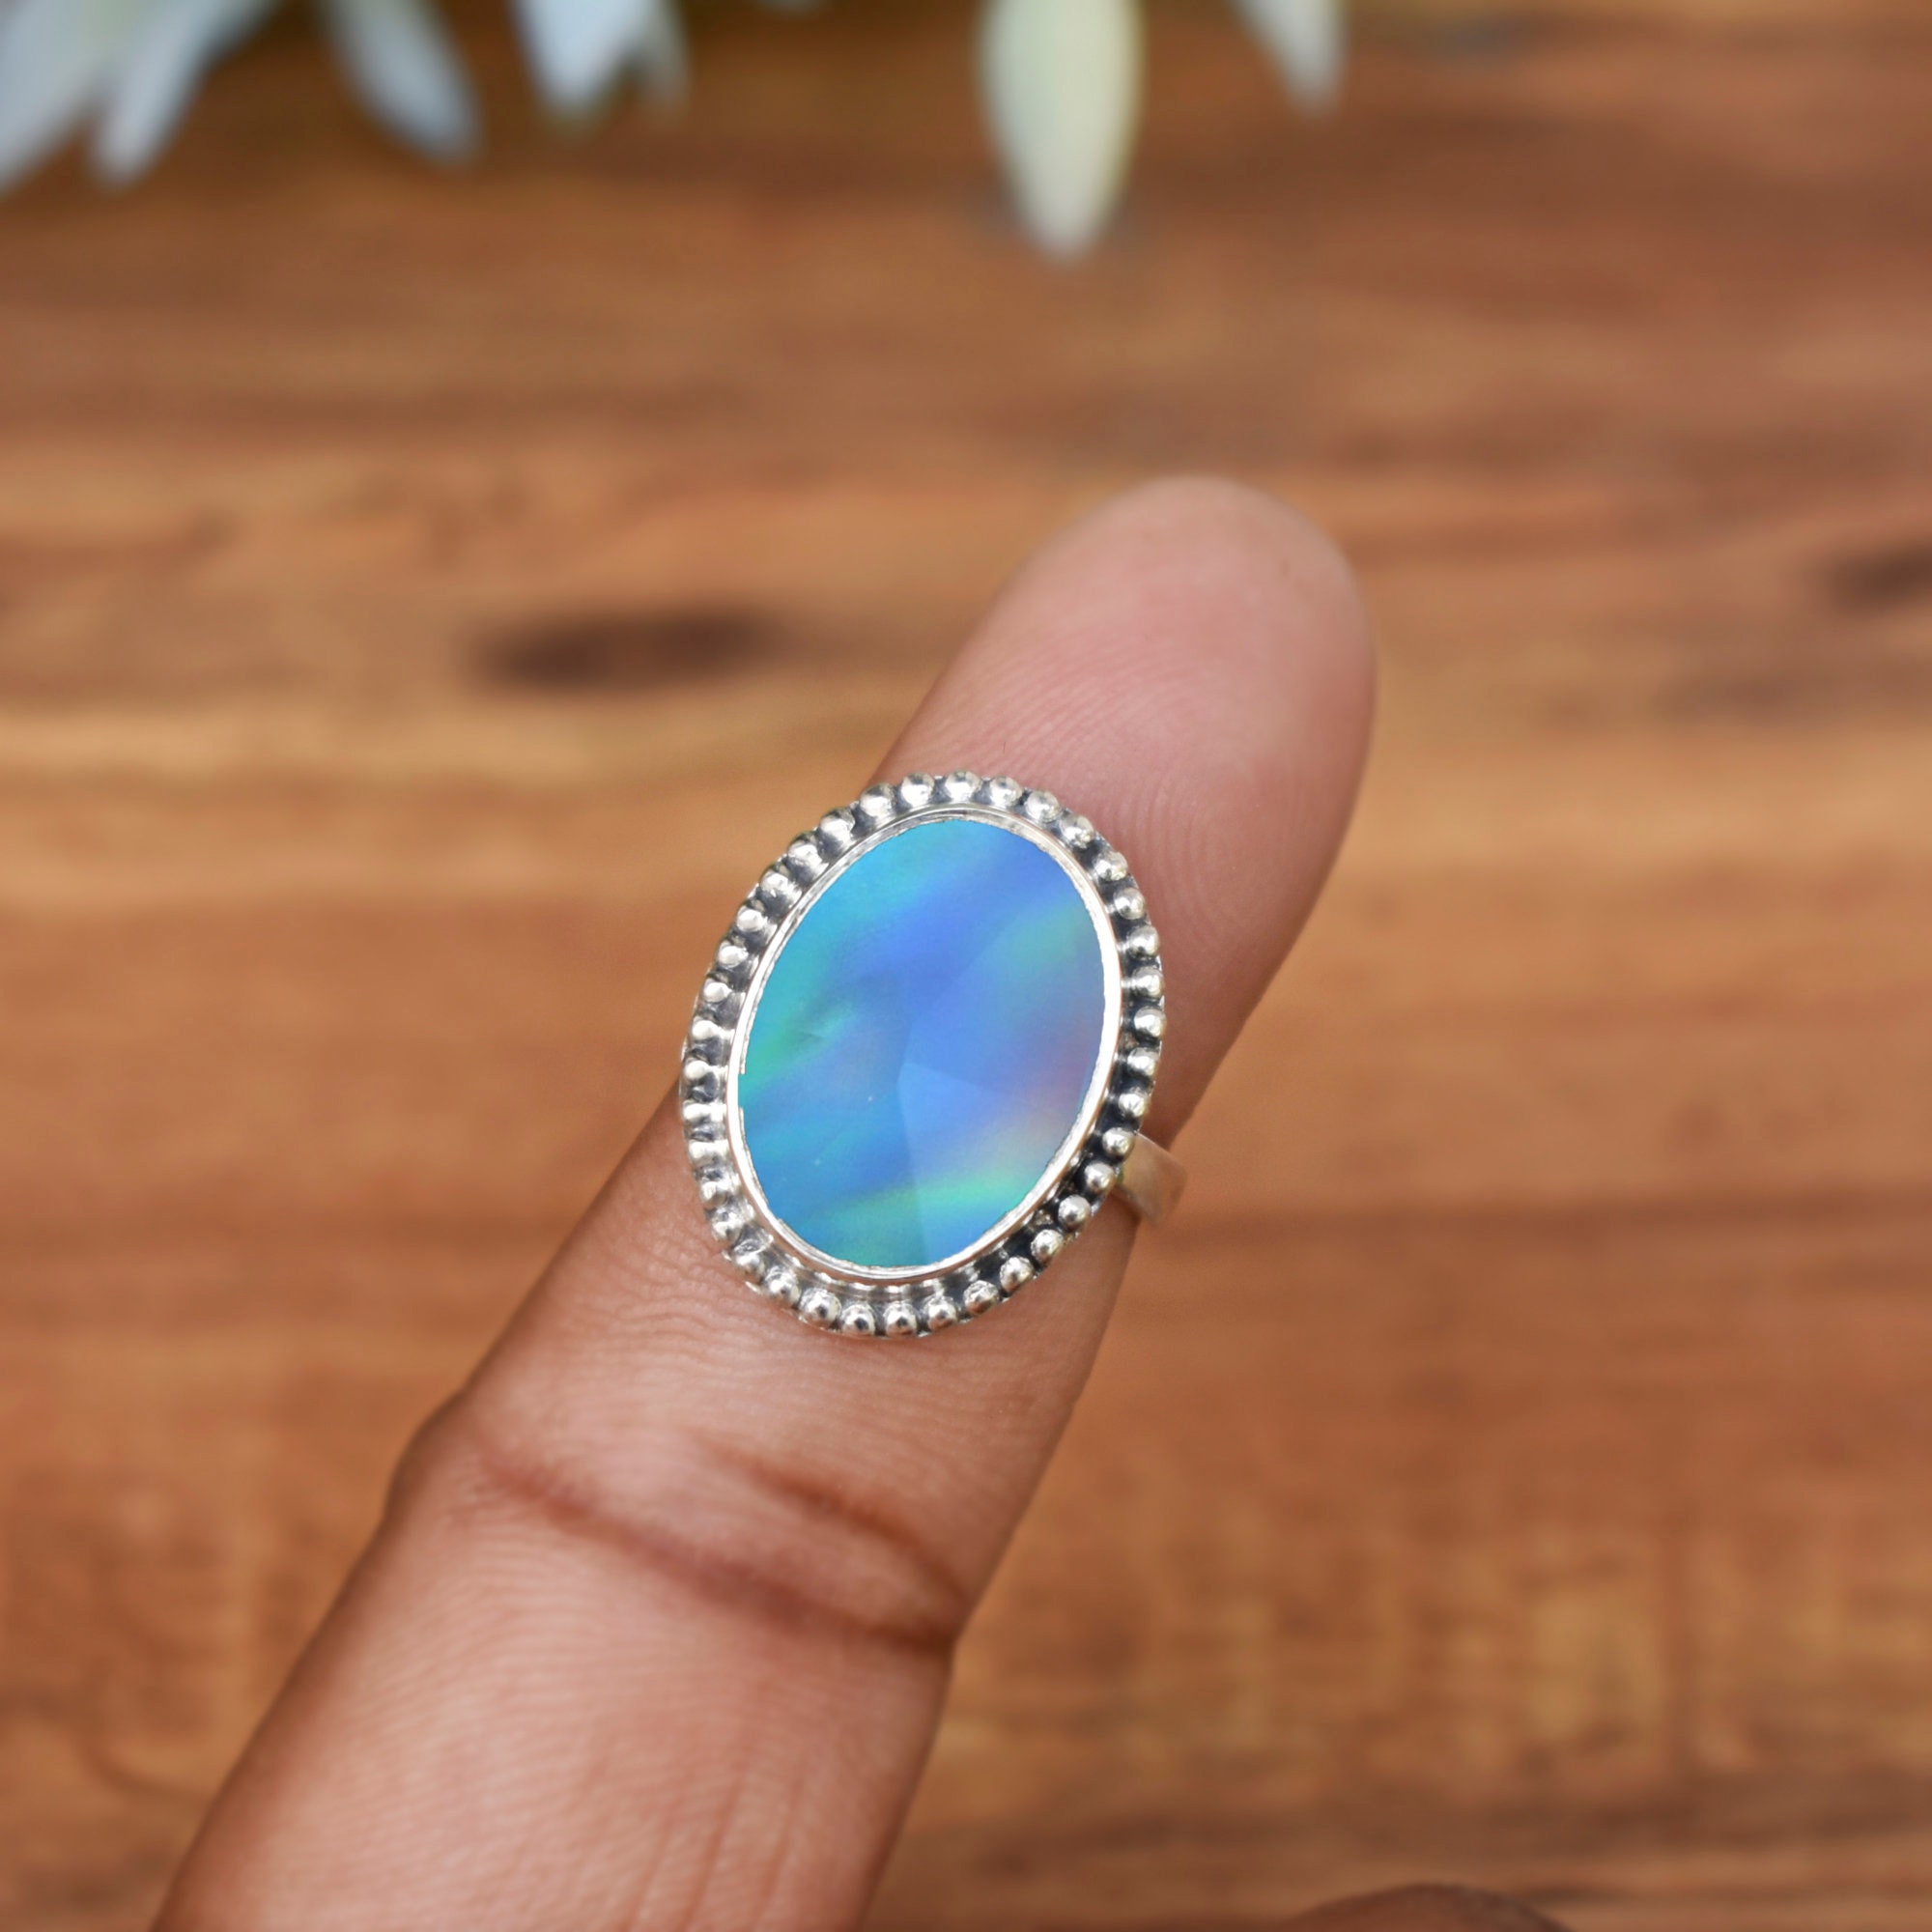 Vintage White Fire Opal & Rainbow Birthstone Oval Opal Rings For Women For  Women Wedding & Engagement Jewelry Silver Color From Qiaomaidou07, $11.59 |  DHgate.Com